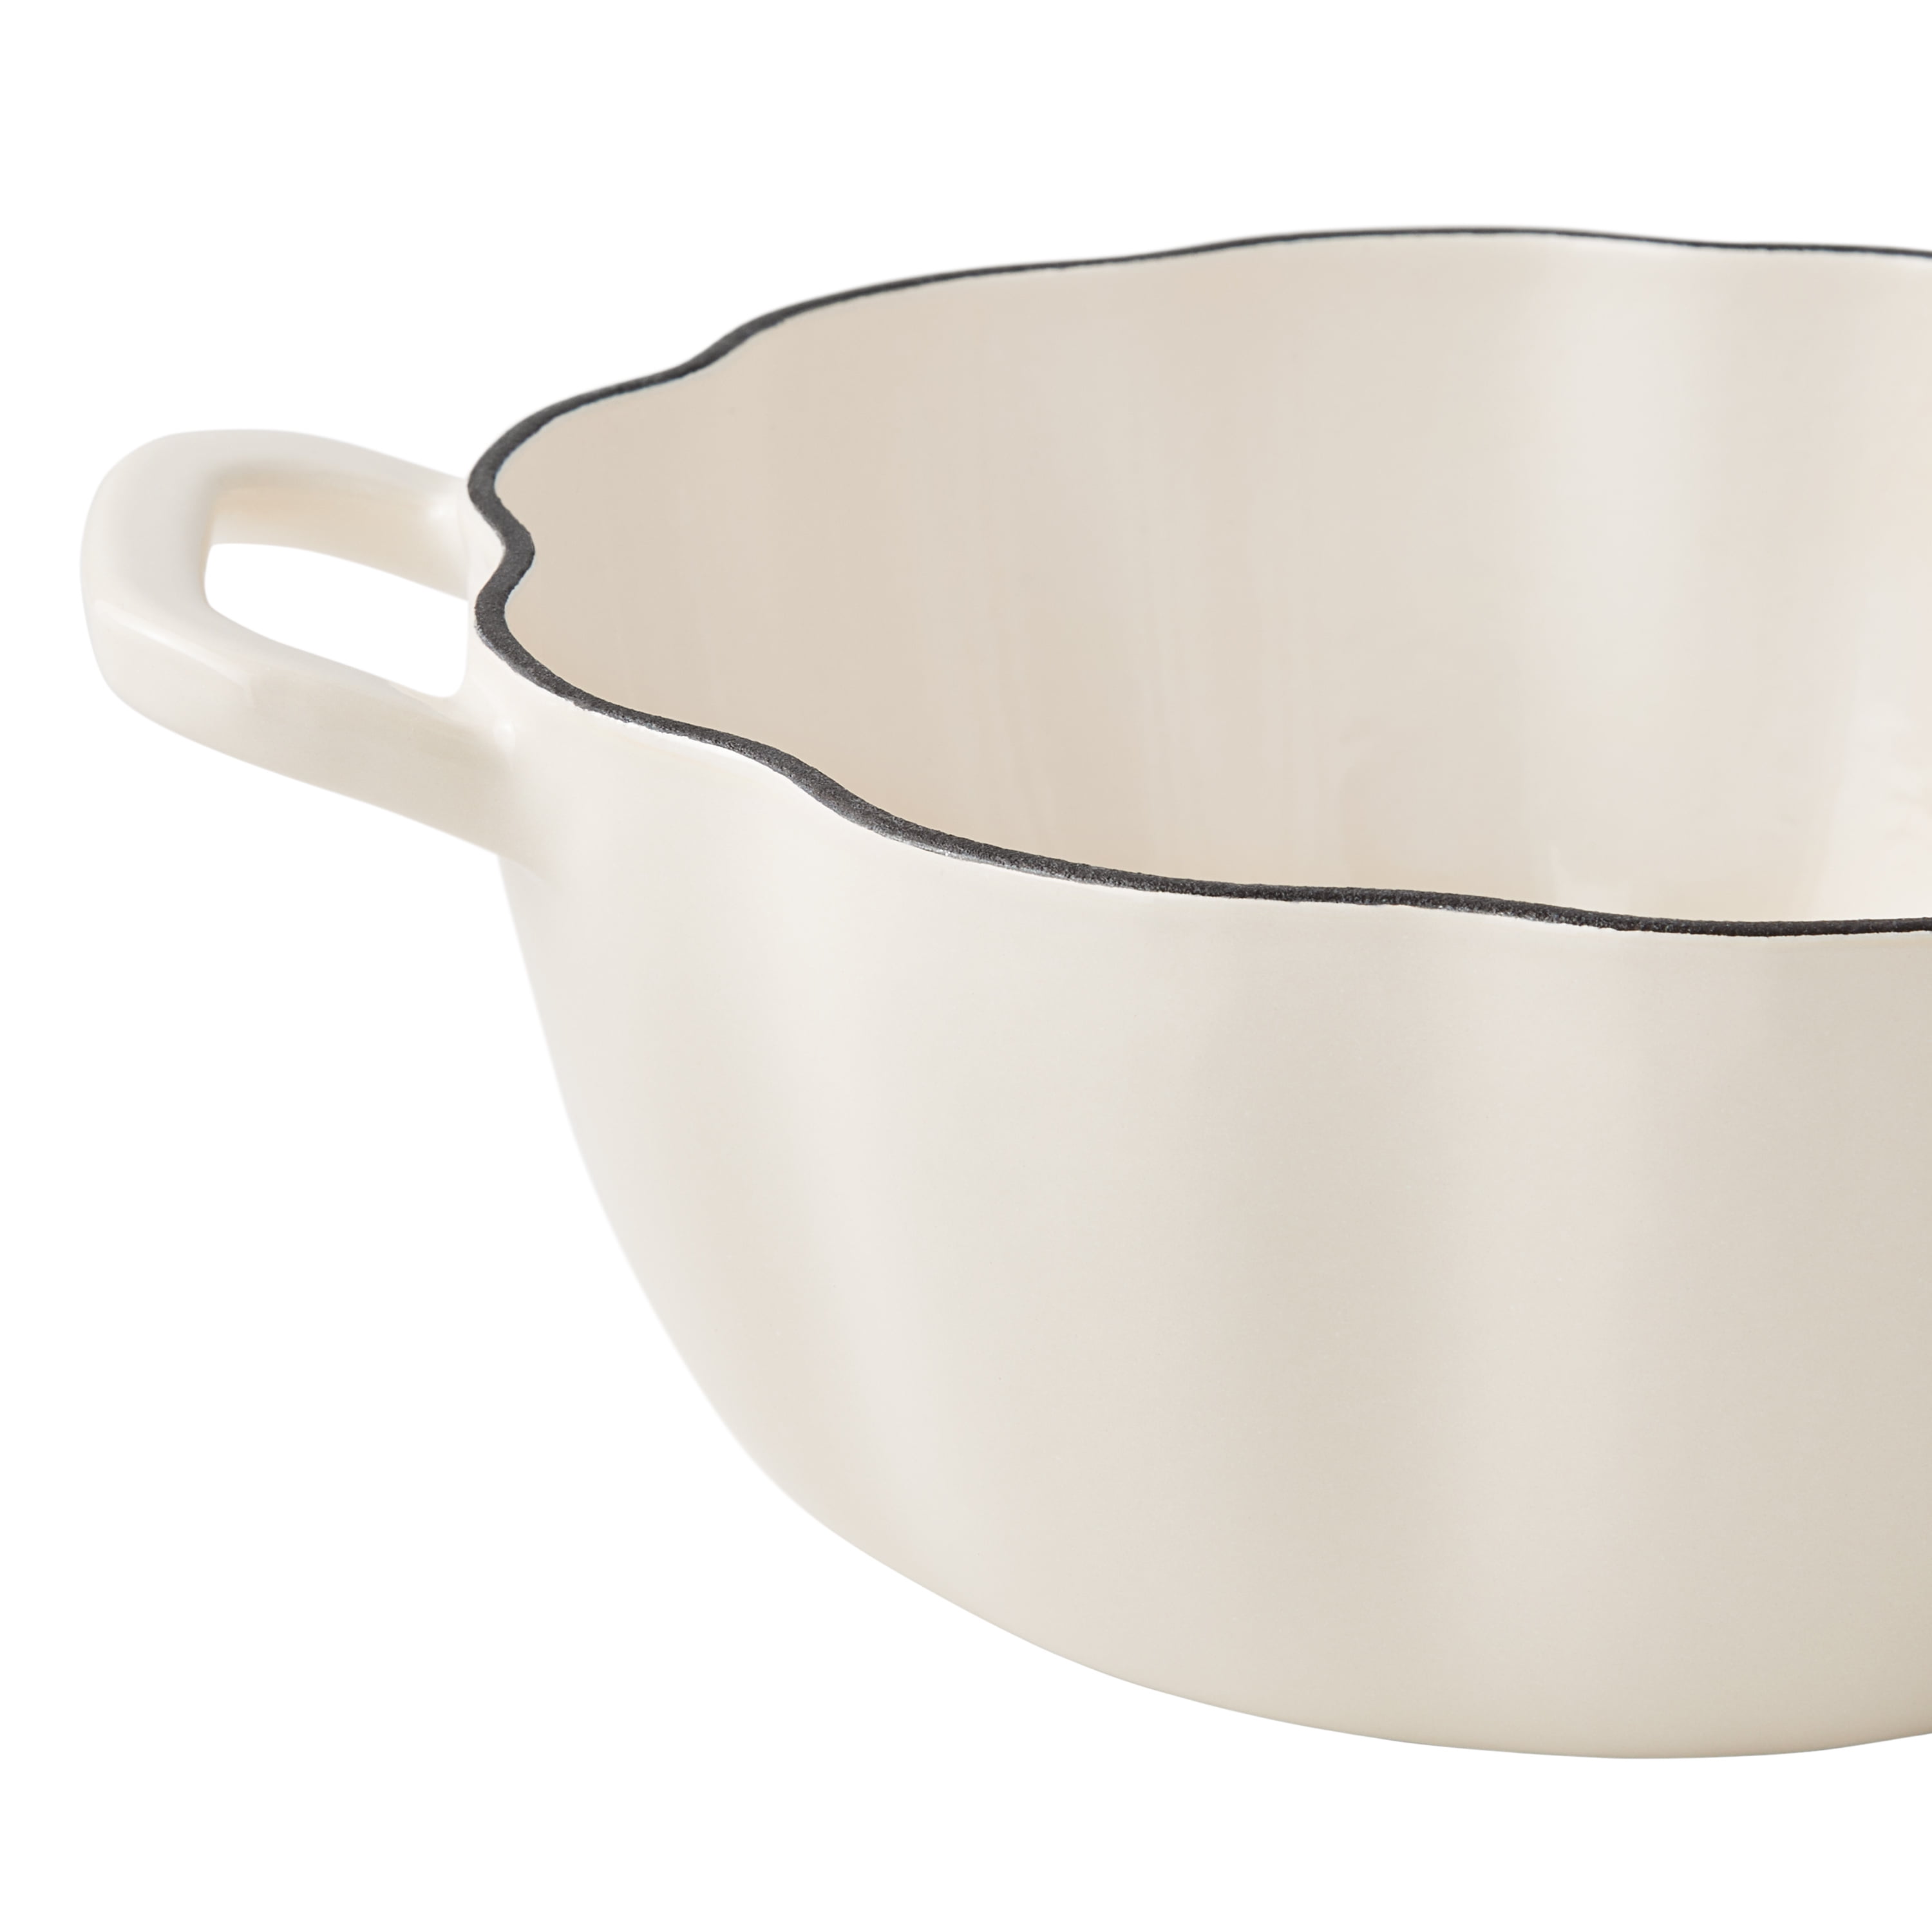 The Pioneer Woman Dropped Pumpkin Cookware, Including A Dutch Oven For Just  $25